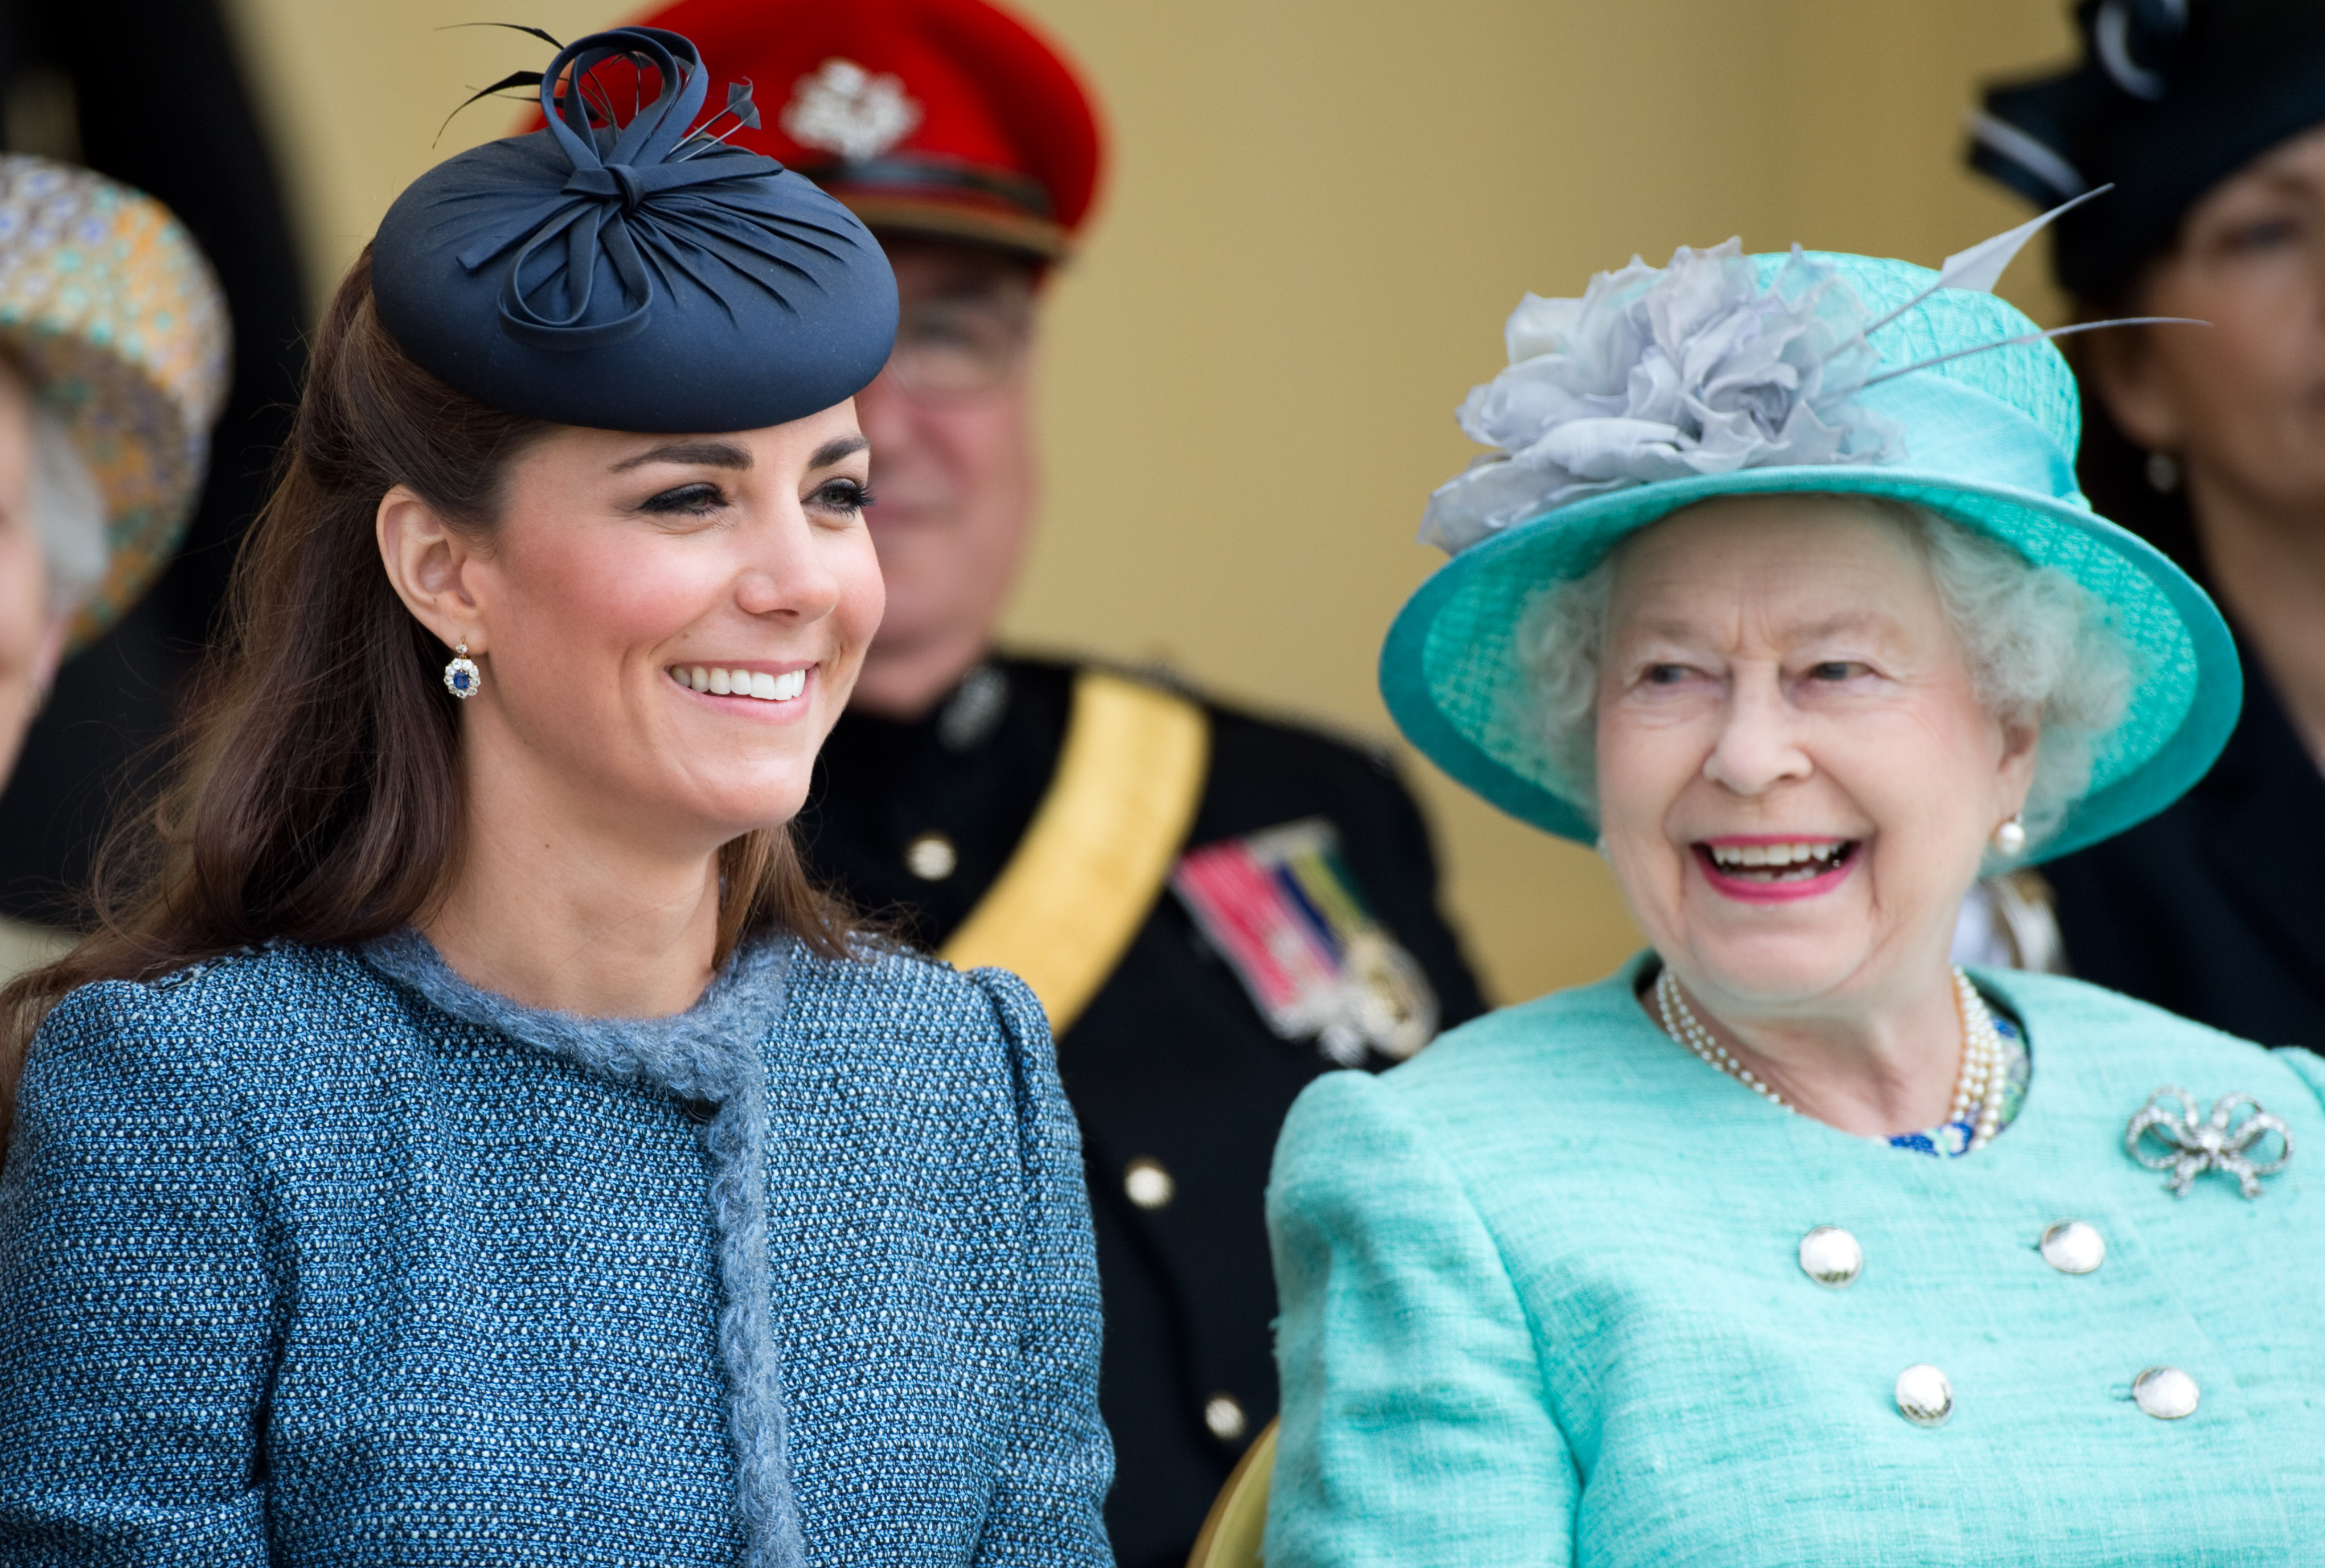 Kate Middleton Will Reportedly Carry On the Queen’s Umbrella Tradition